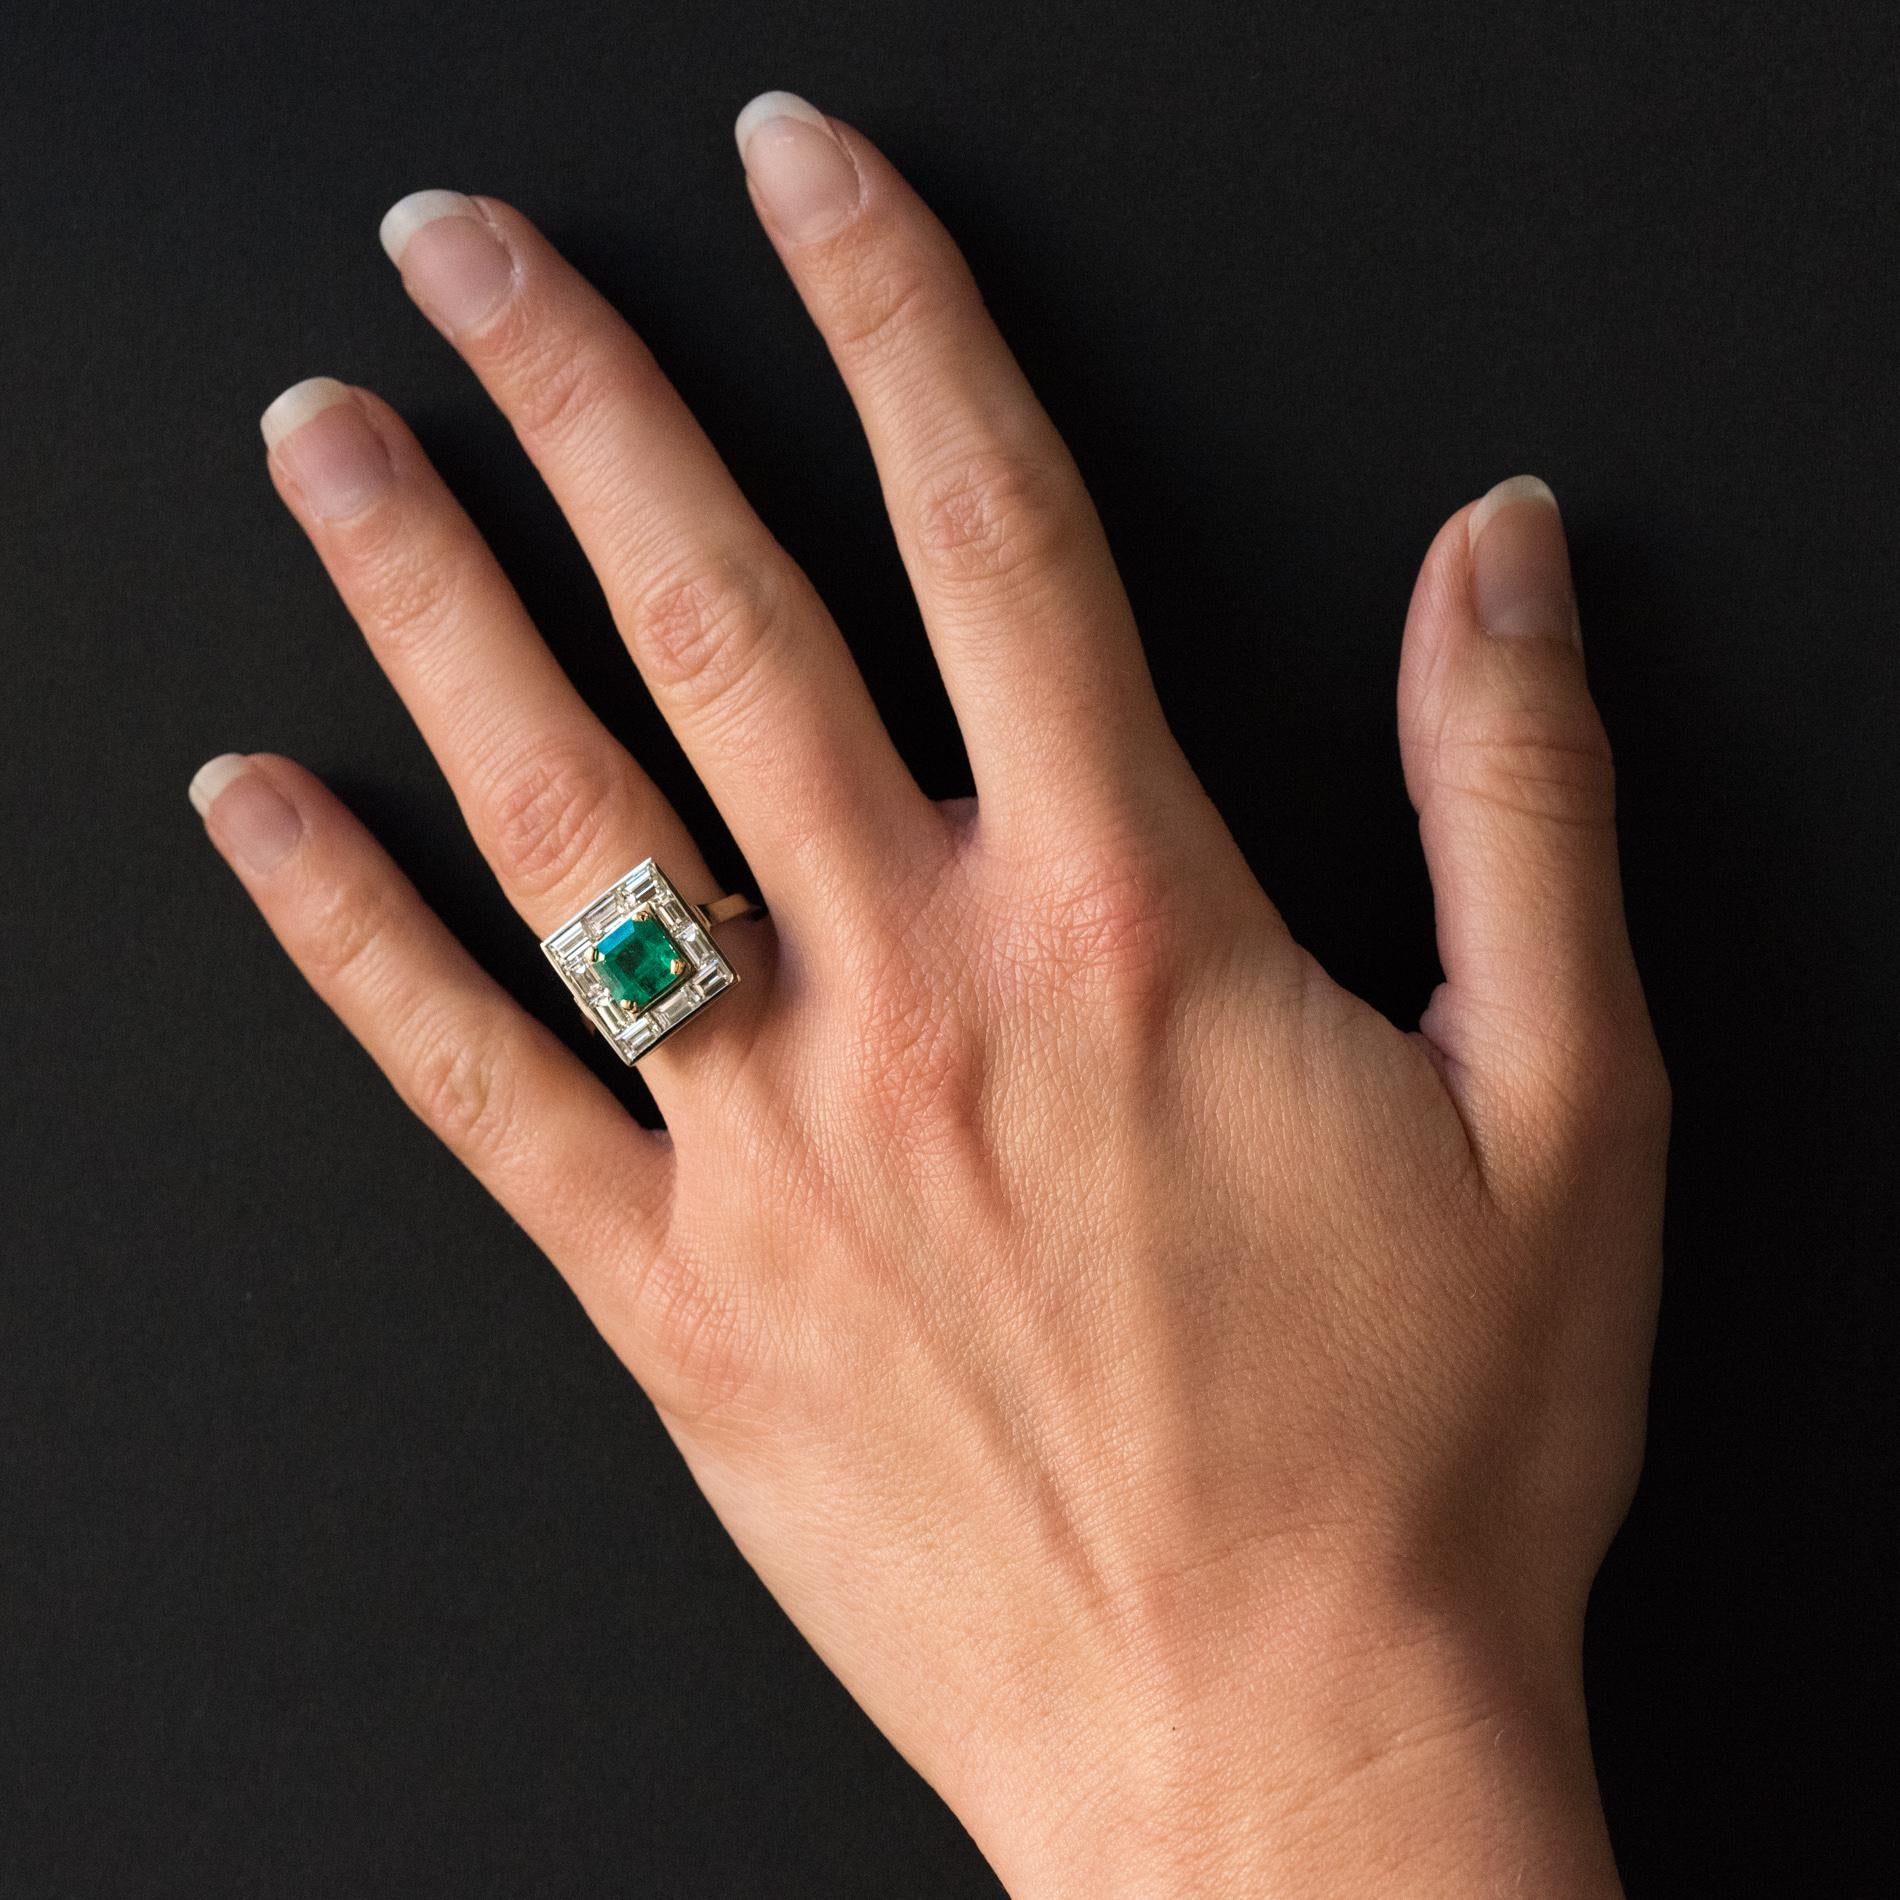 Baume creation.
Ring in 18 karat white gold, eagle's head hallmark. 
This sublime ring holds a claw set square emerald surrounded by 10 baguette- cut diamonds. The geometric style bed holding the diamonds is reminiscent of the Art Deco period.